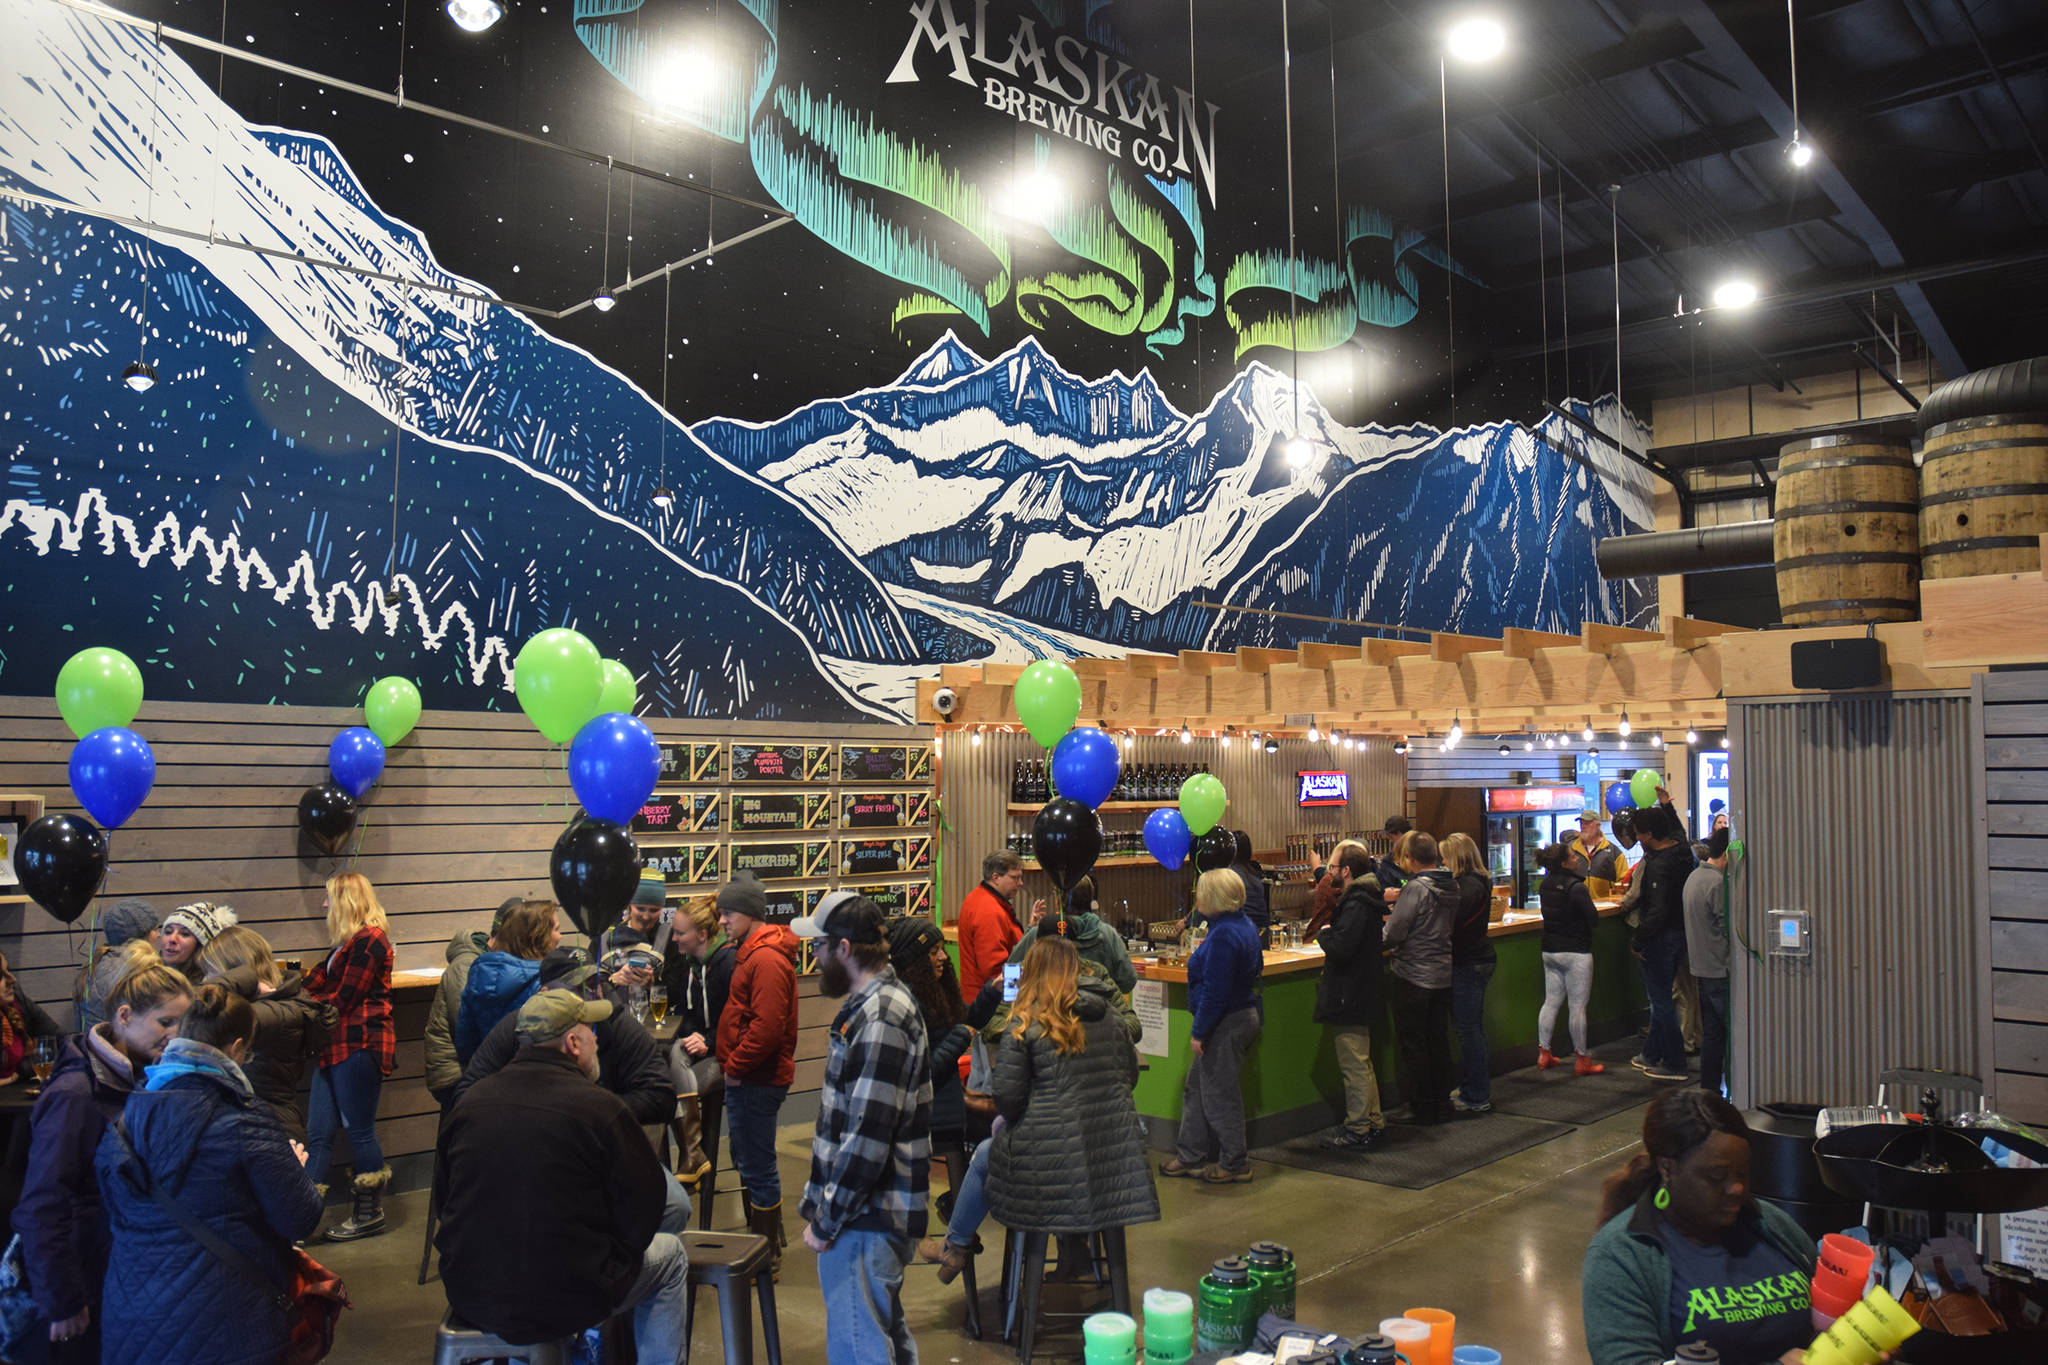 Beer lovers gather at the grand opening of Alaskan Brewing Co.’s new tasting room on Commercial Boulevard, Saturday, Nov. 3, 2018. (Kevin Gullufsen | Juneau Empire)